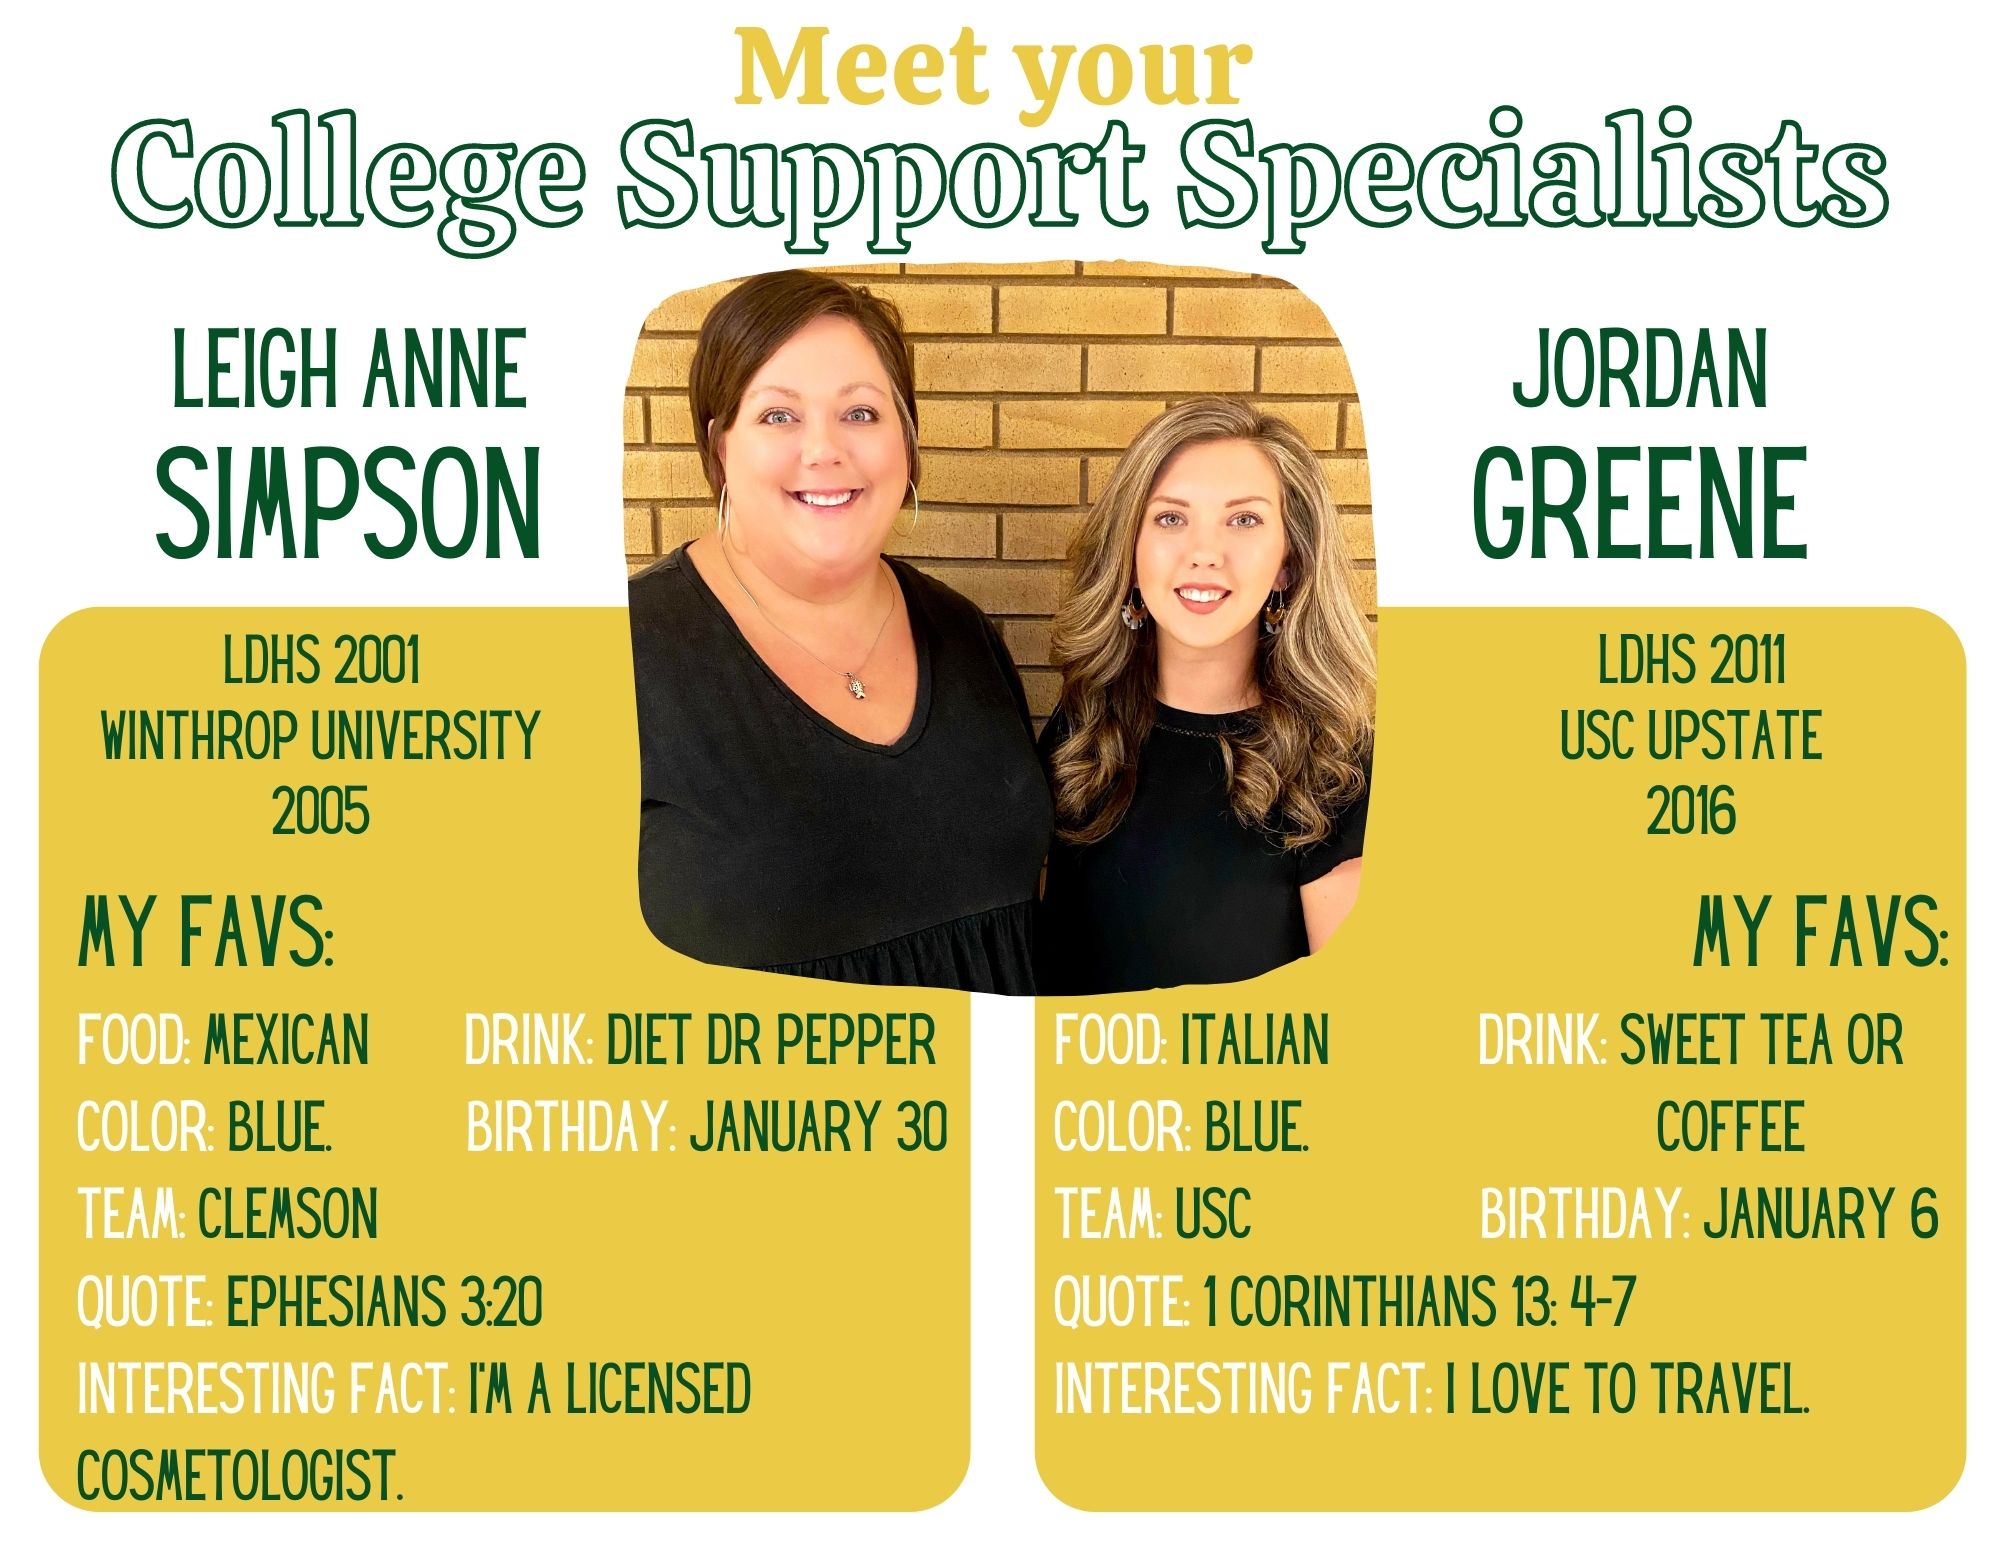 Meet your College Support Specialists